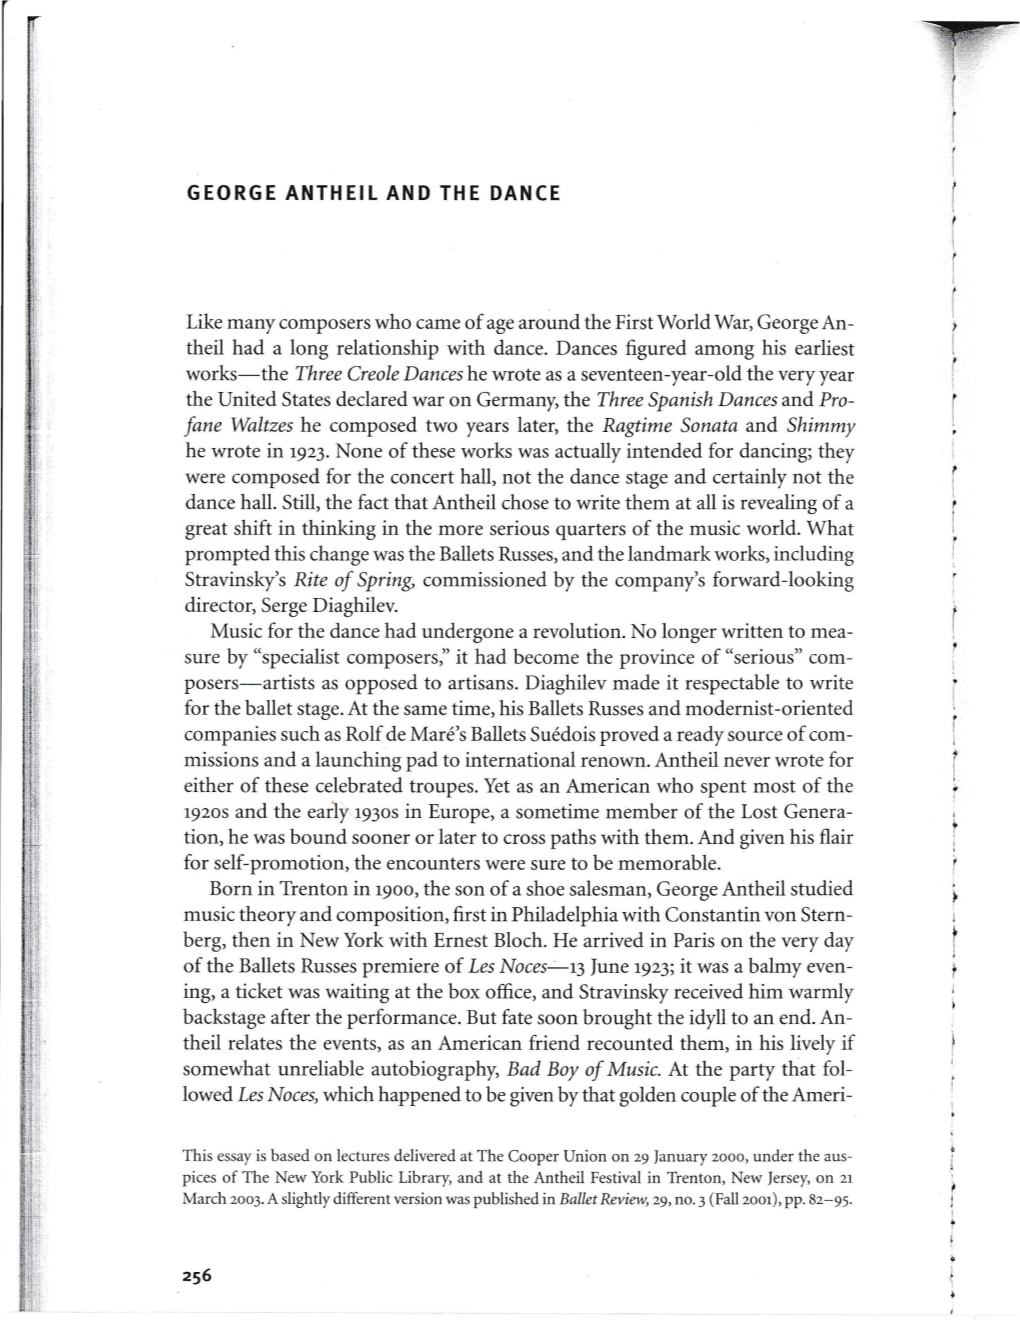 George Antheil and the Dance (2005).Pdf